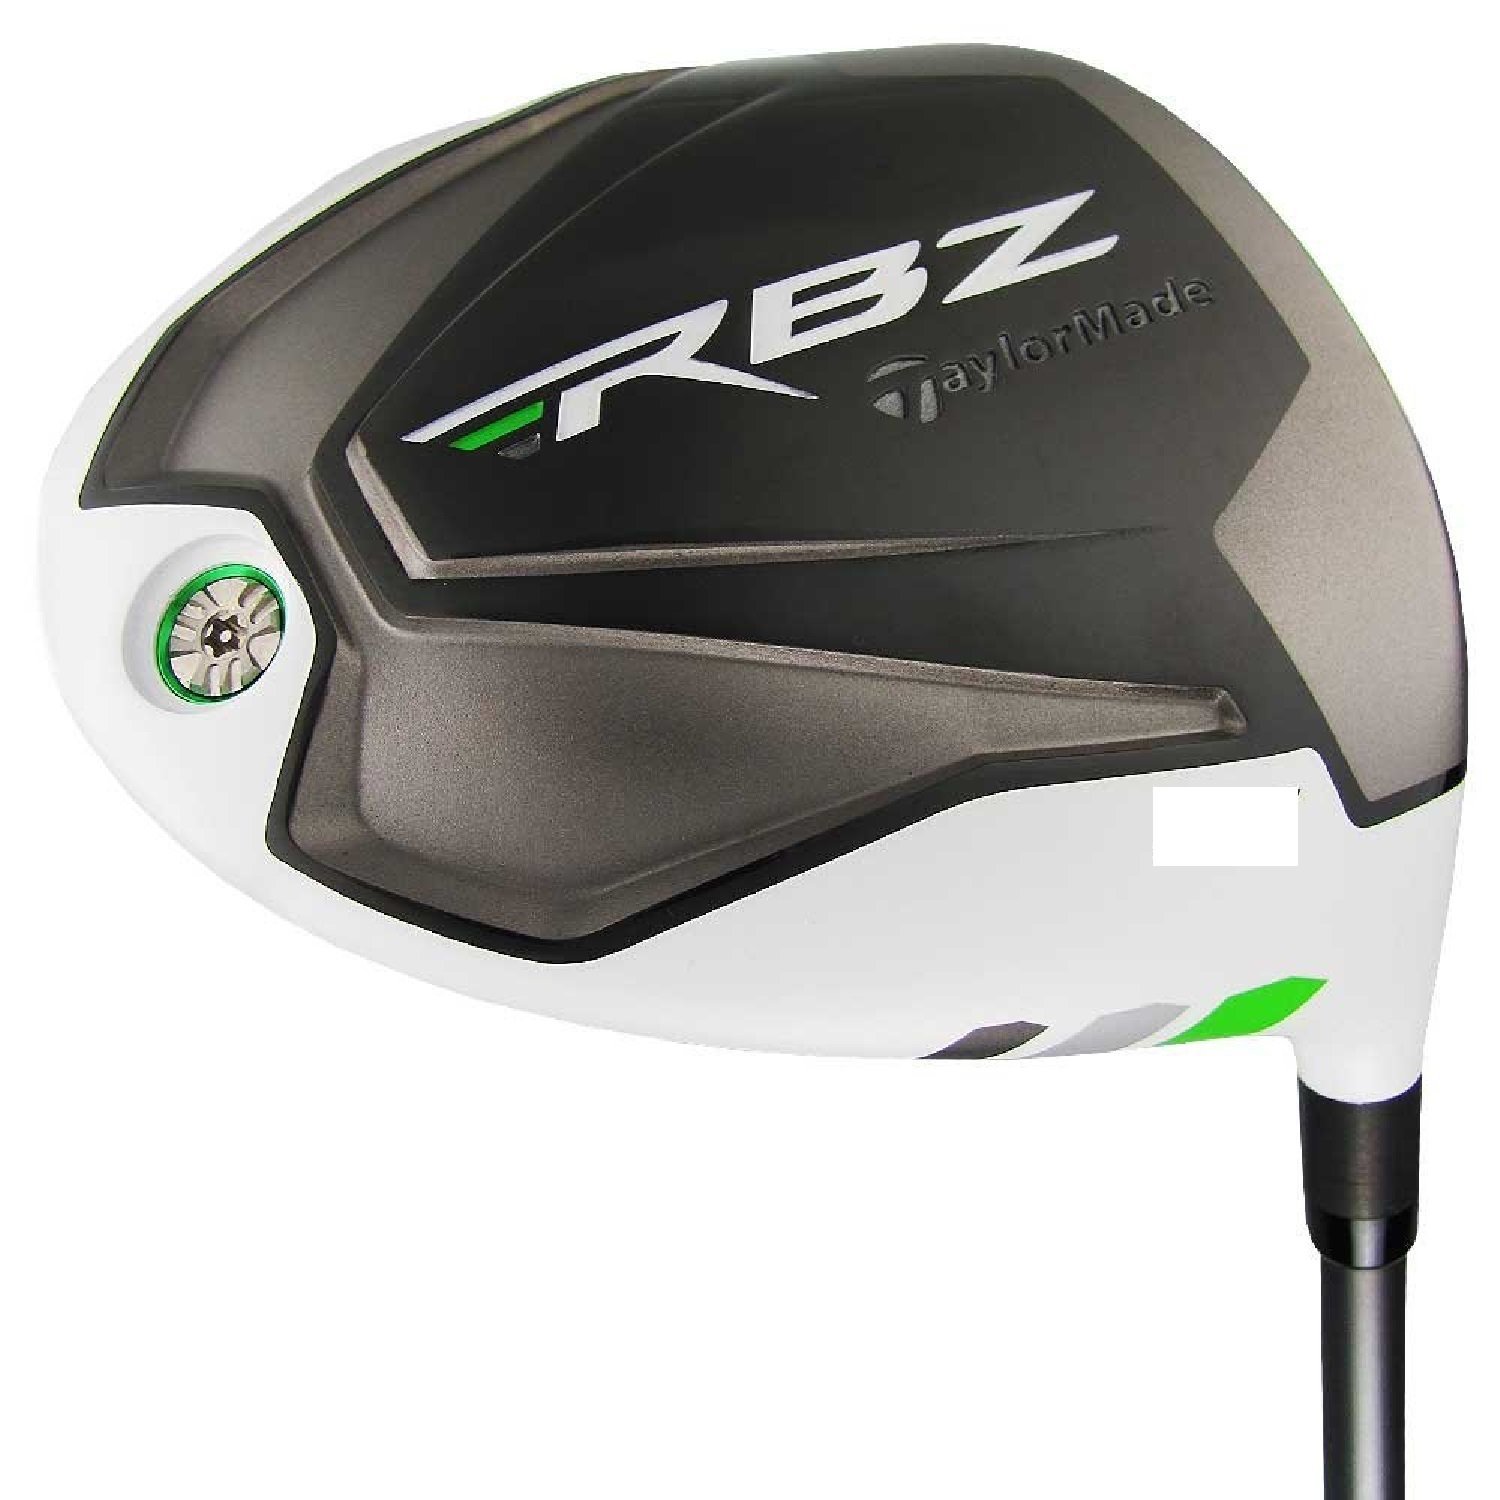 taylormade rbz driver settings